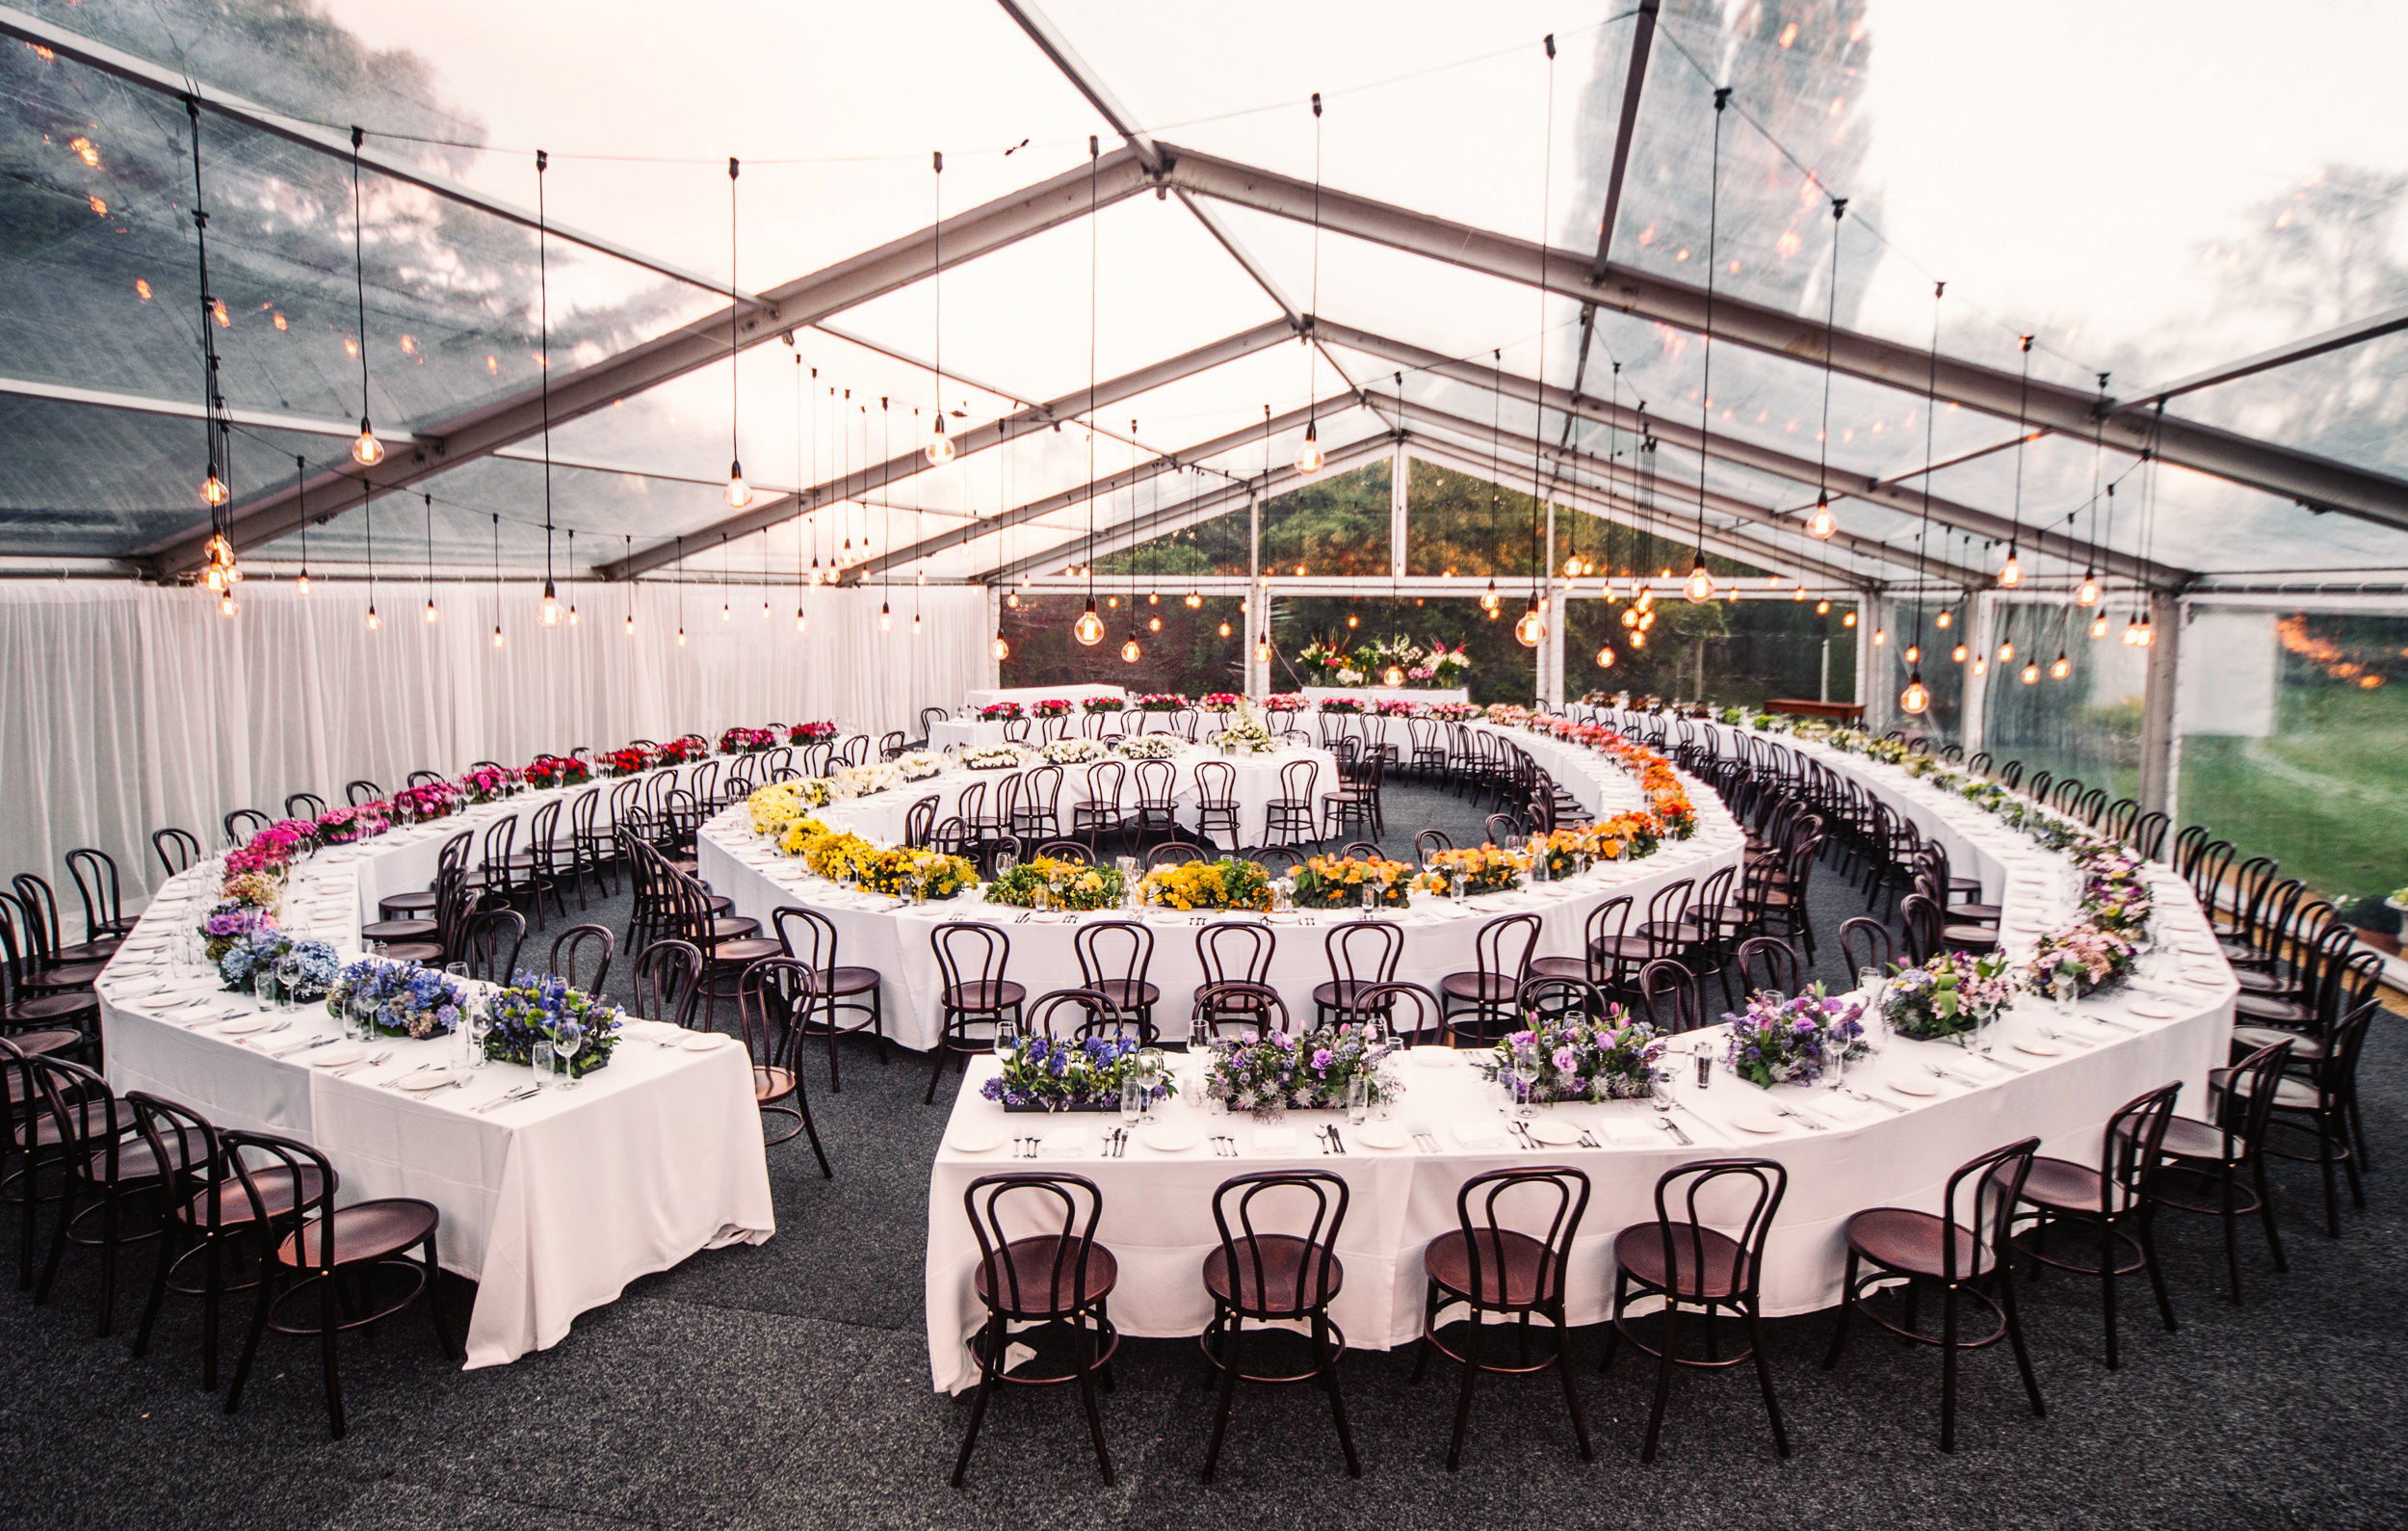 Spiral table in a clear marquee custom lighting